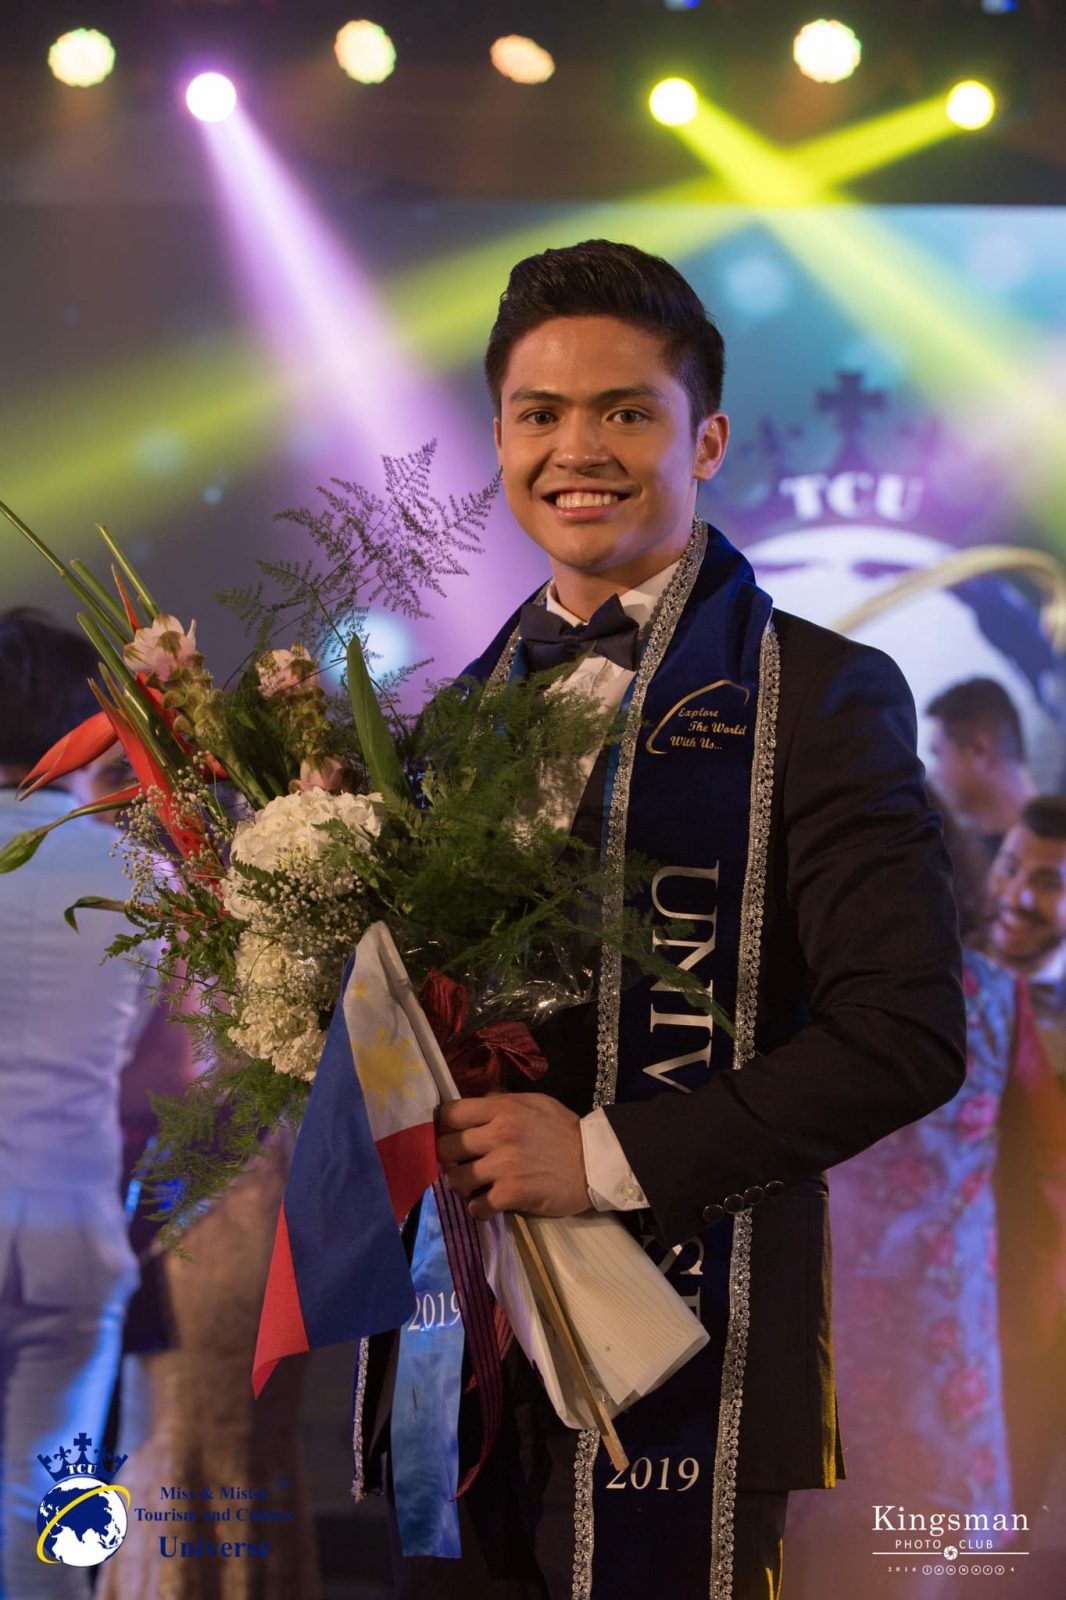 Yves Campos wins Mister Tourism